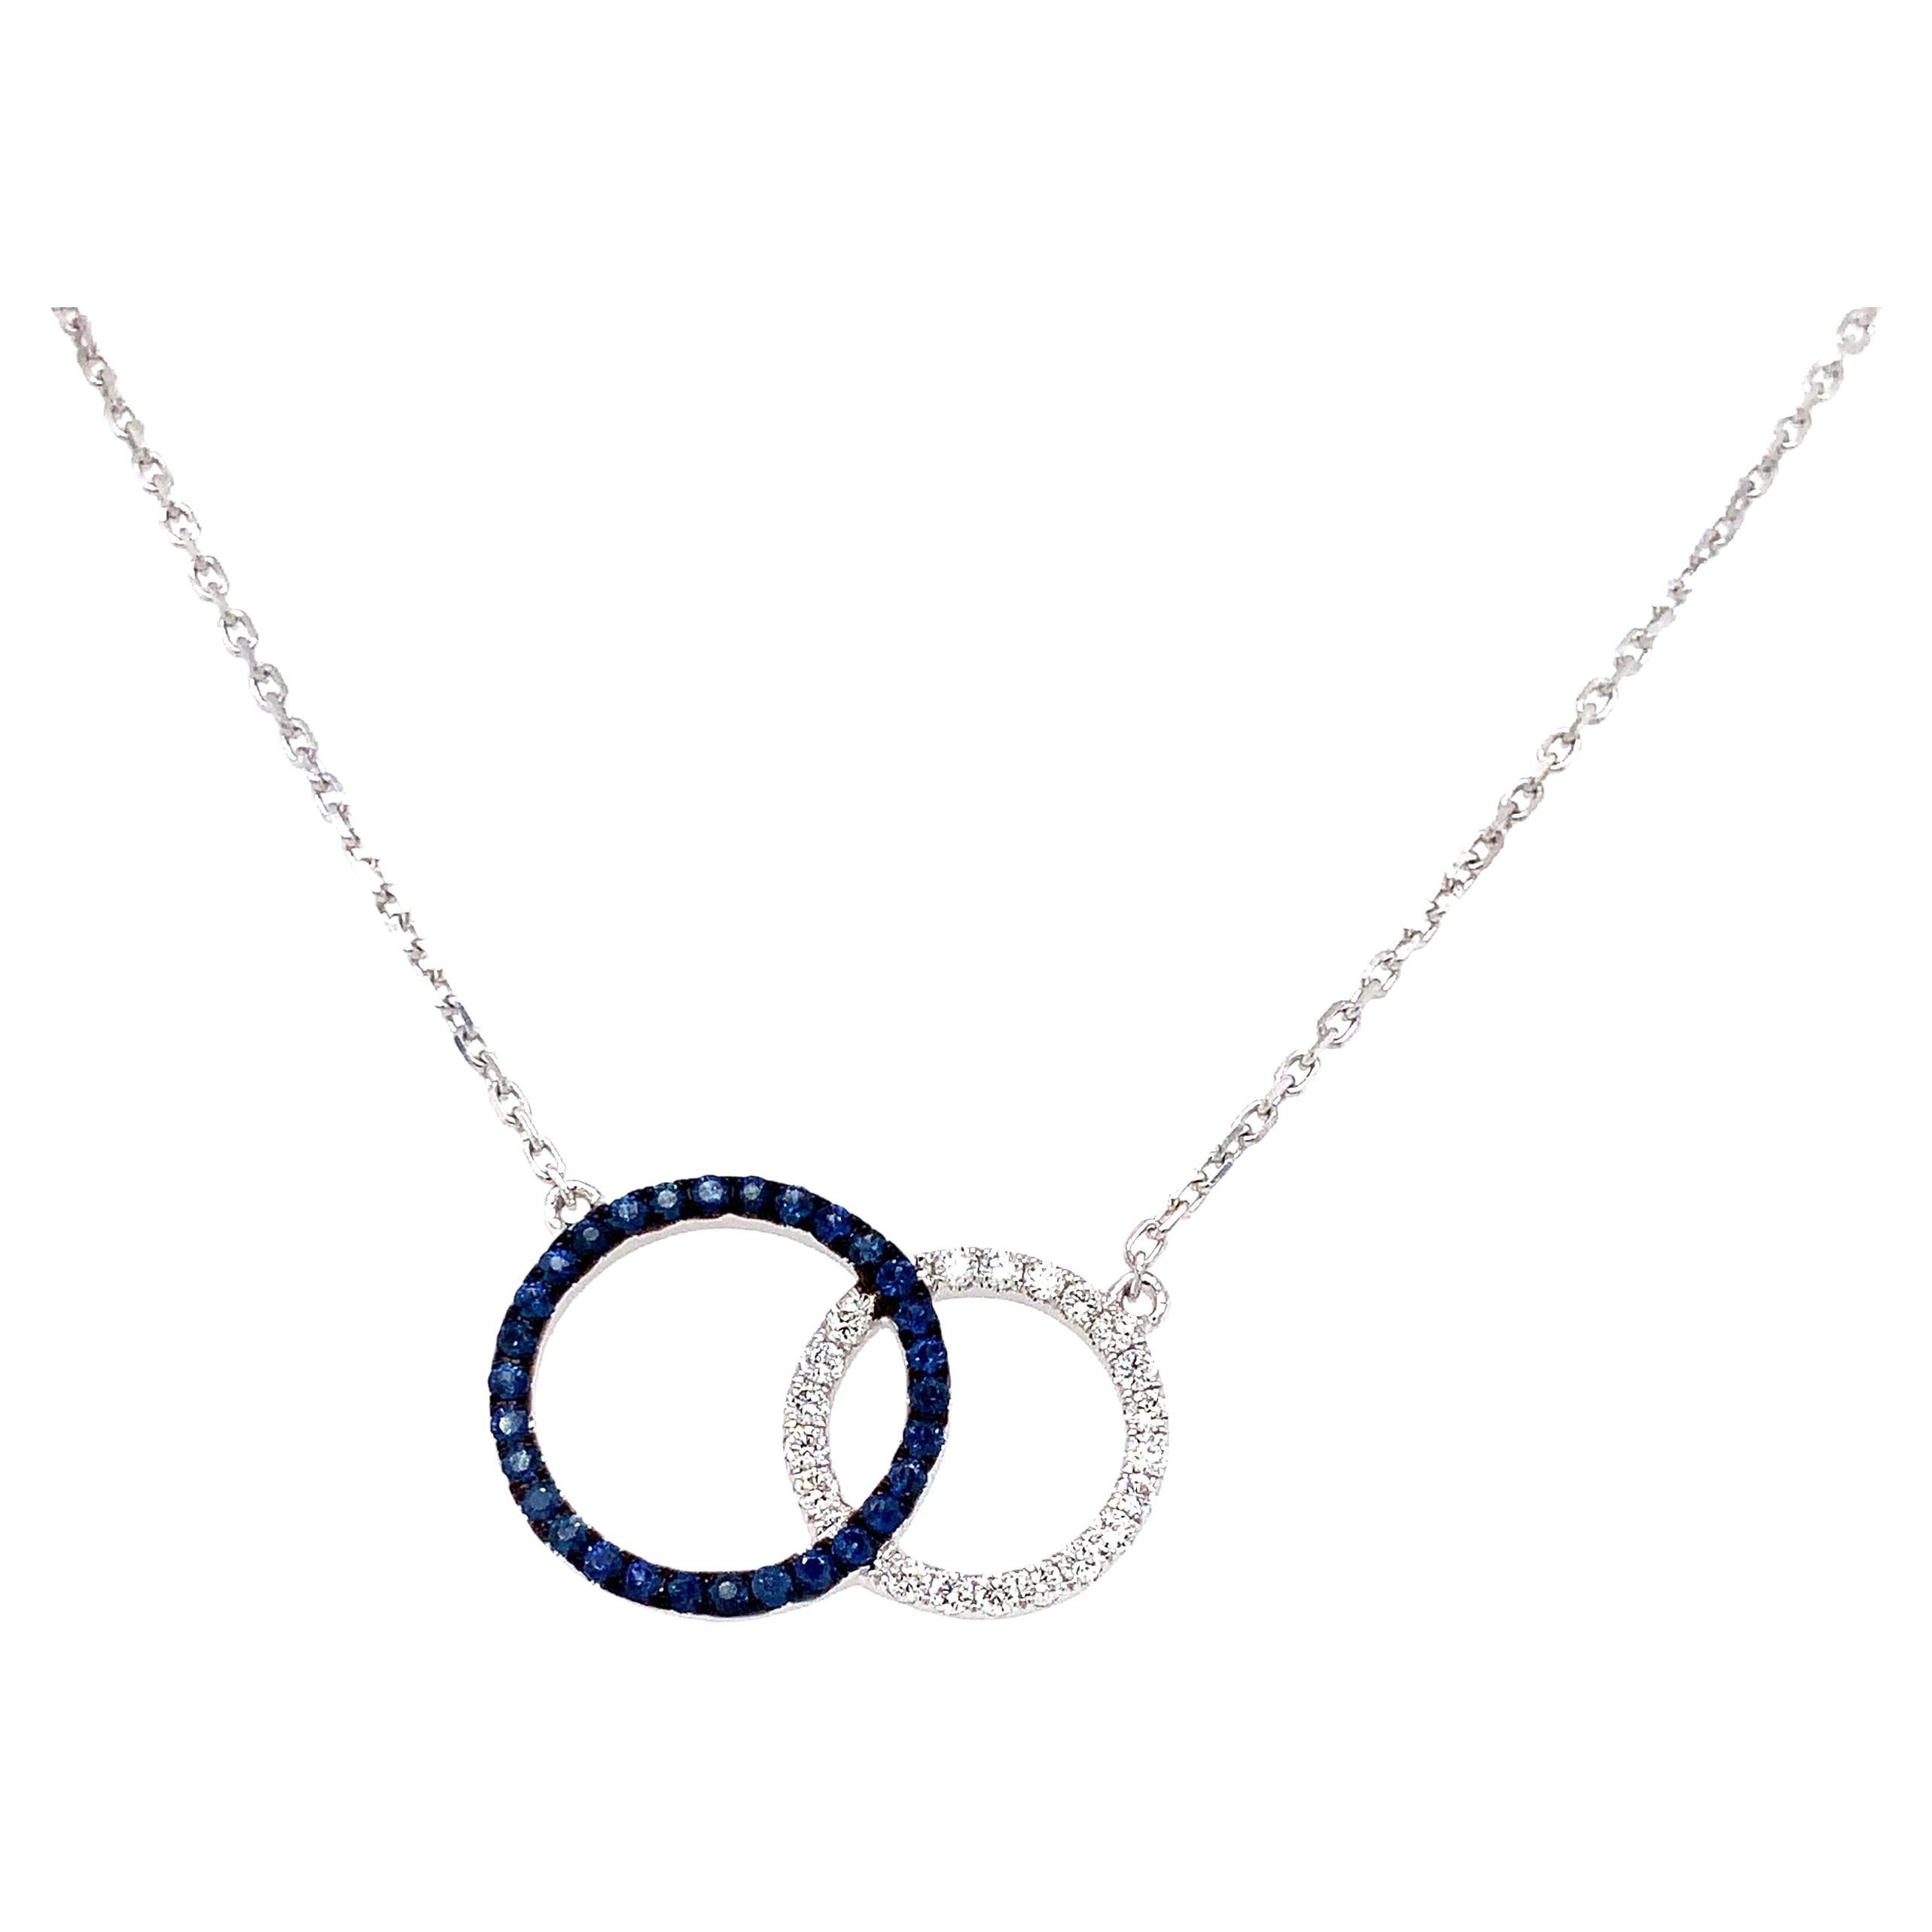 Afarin Collection Love Knot Blue Sapphire and Diamond Necklace Set in 18k White For Sale